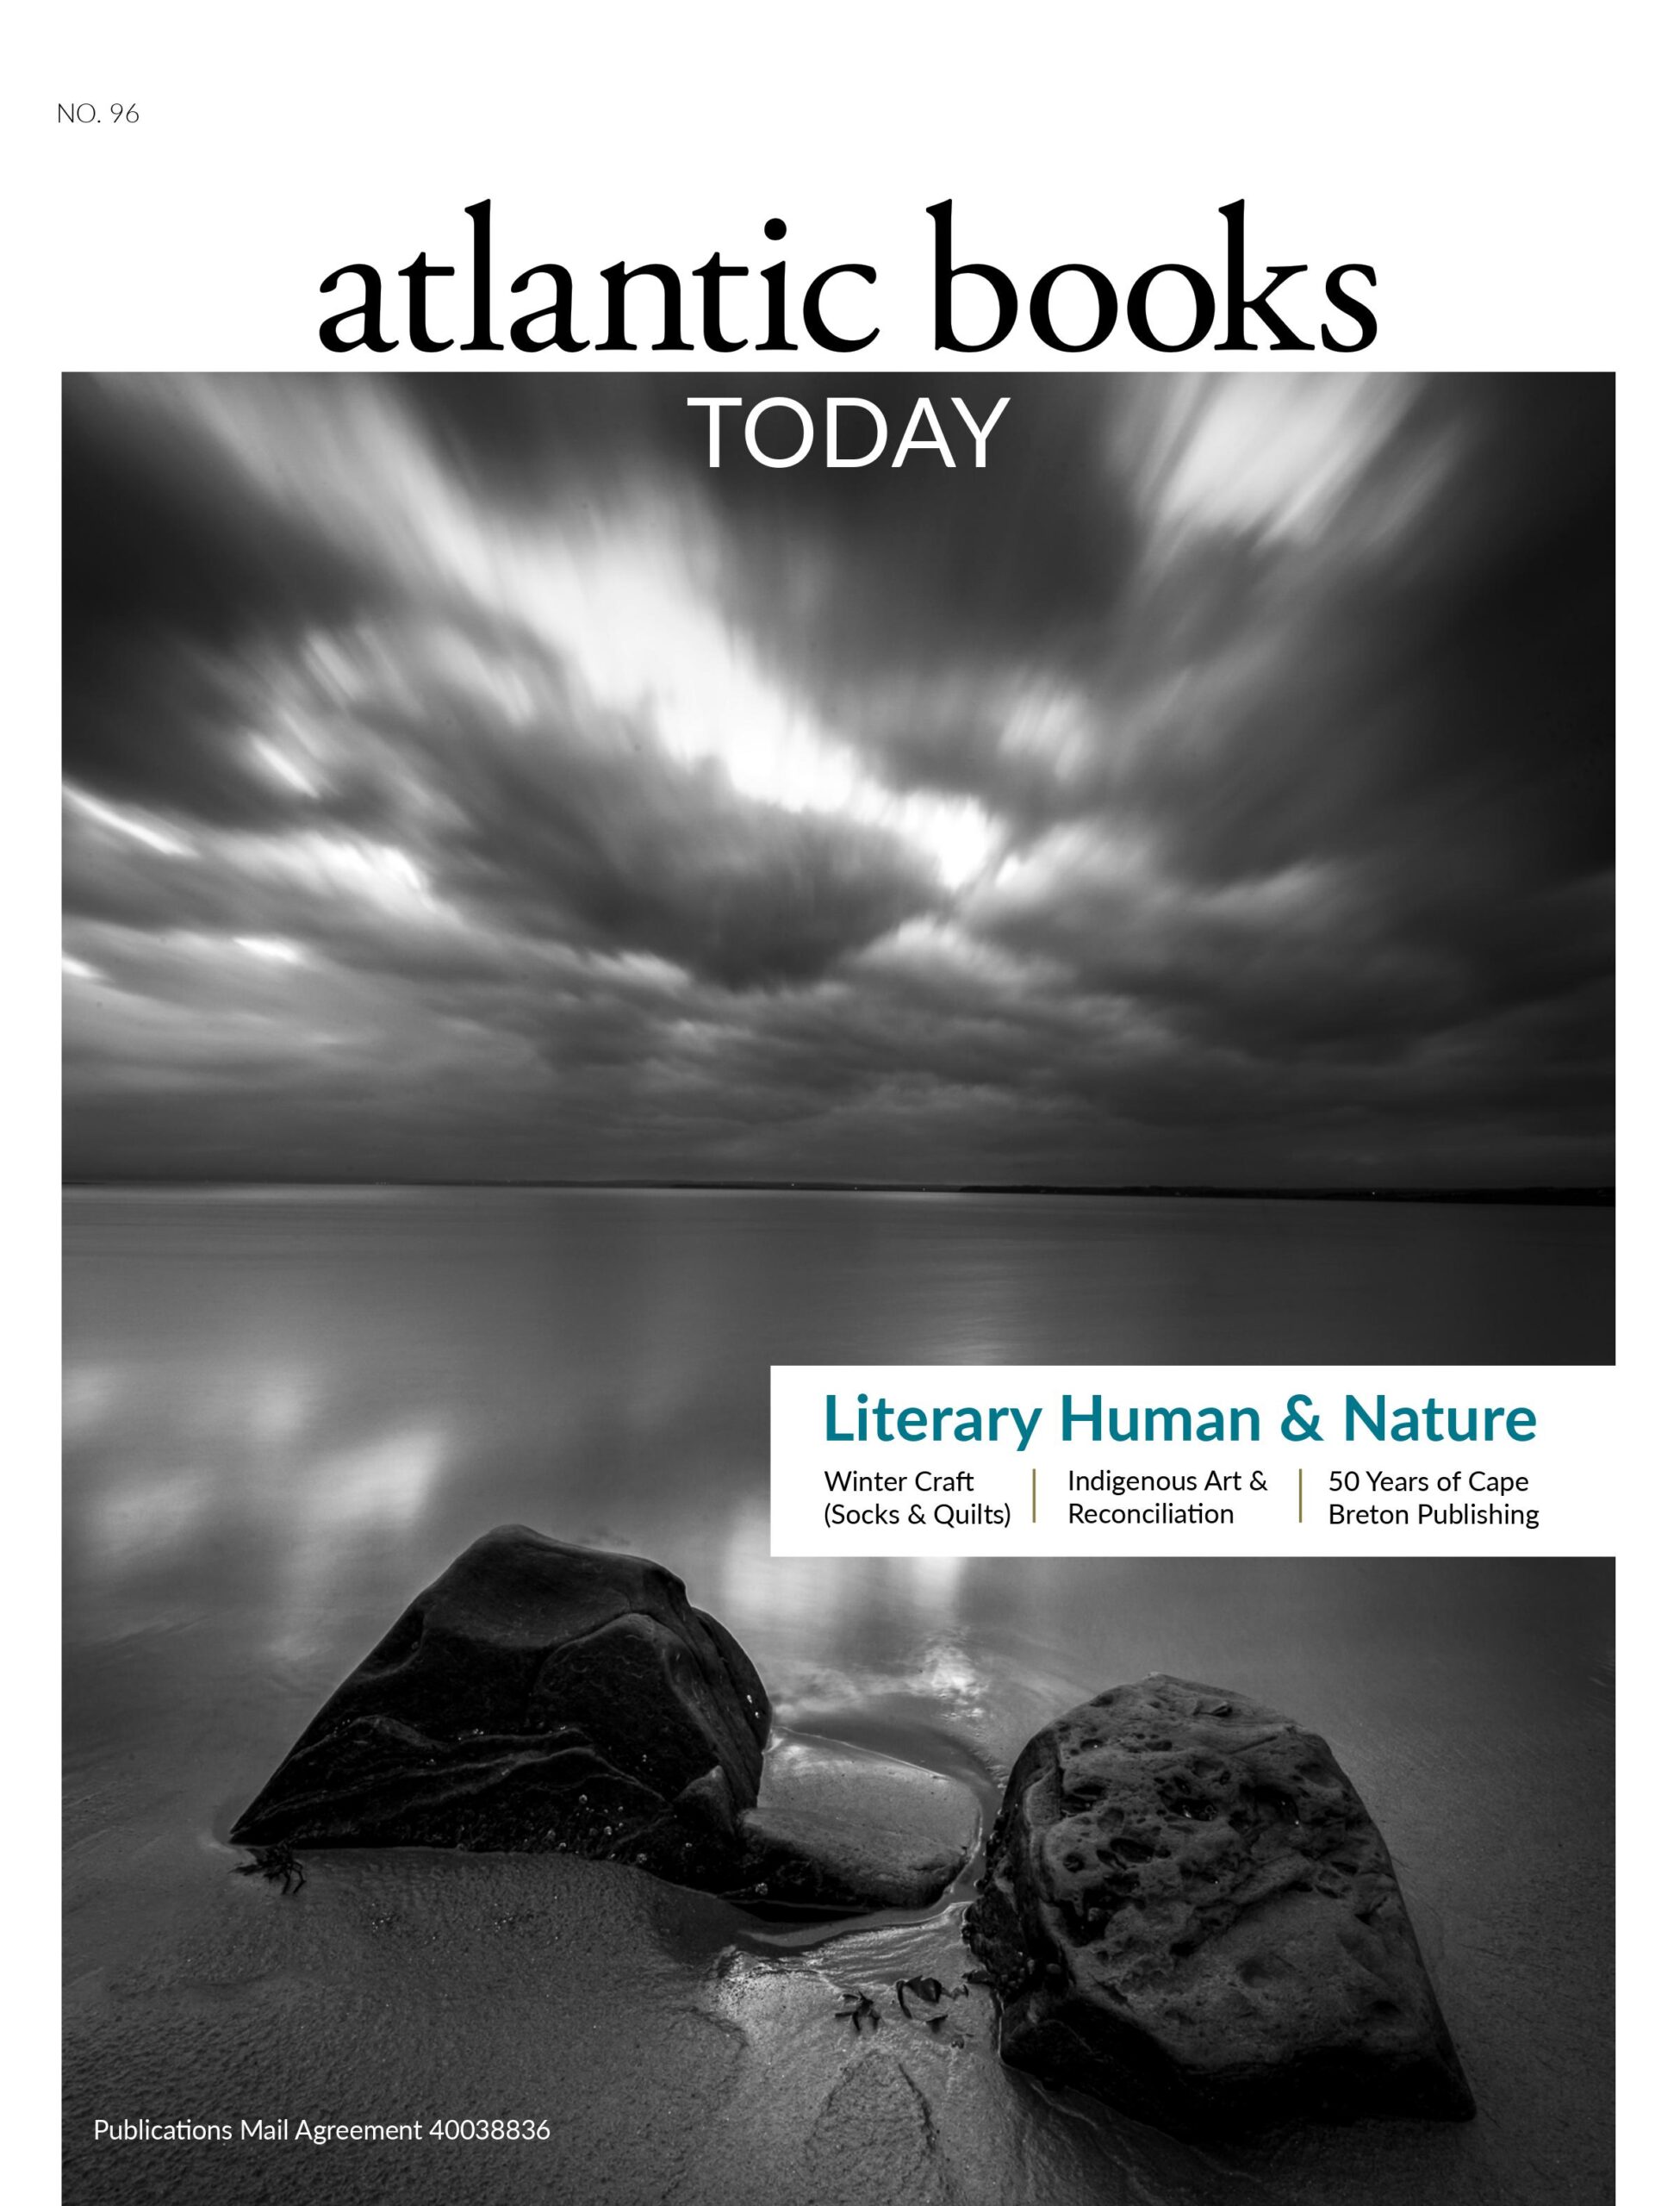 A black and white photo of a body of water with two rocks and the logo Atlantic Books Today at the top